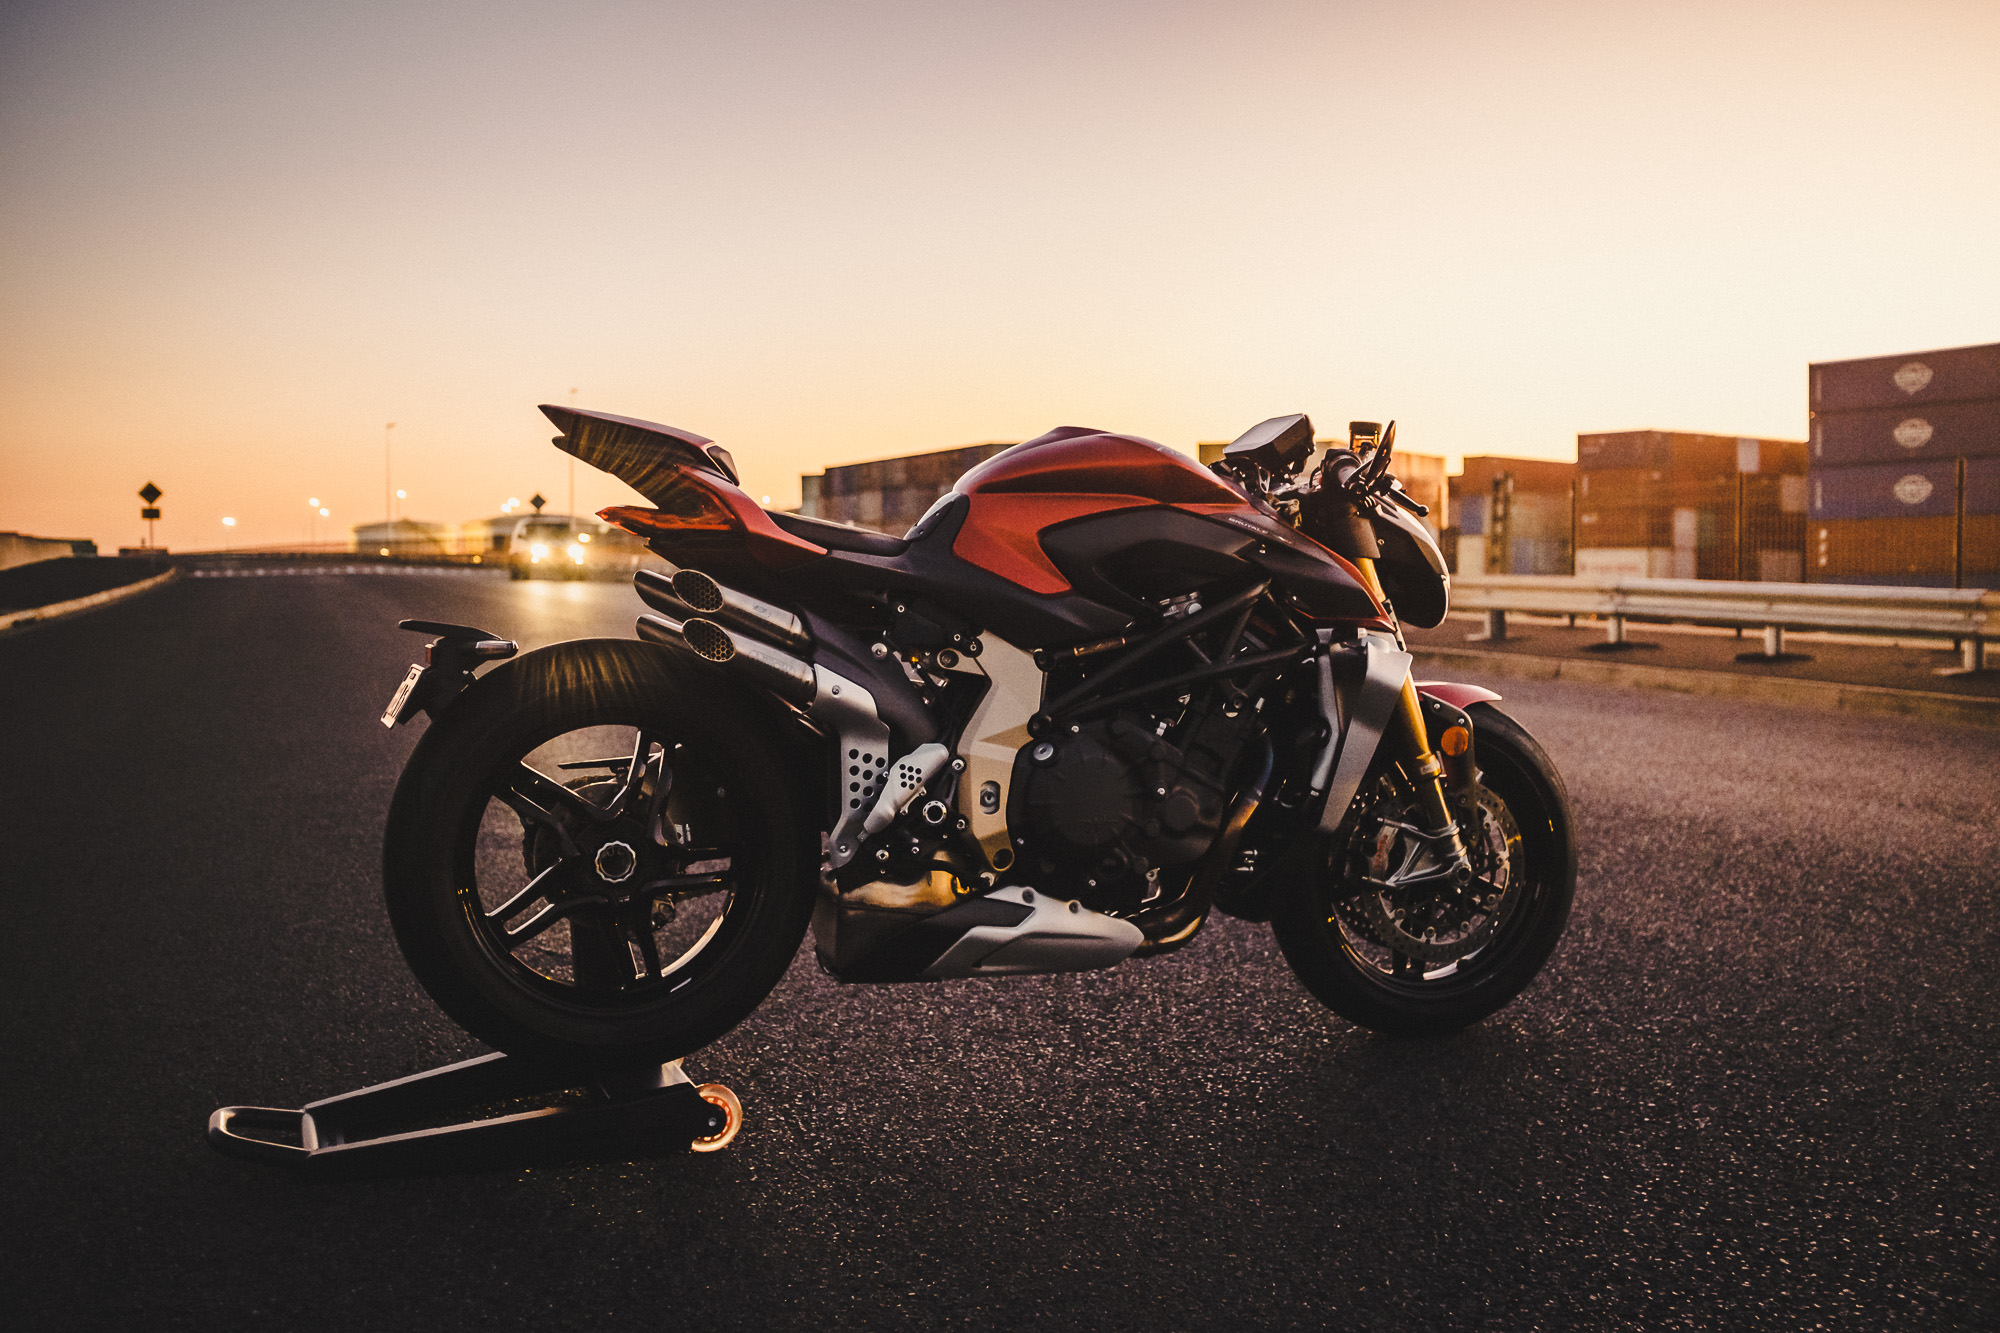 An MV Agusta Brutale motorcycle on an industrial road at sunset